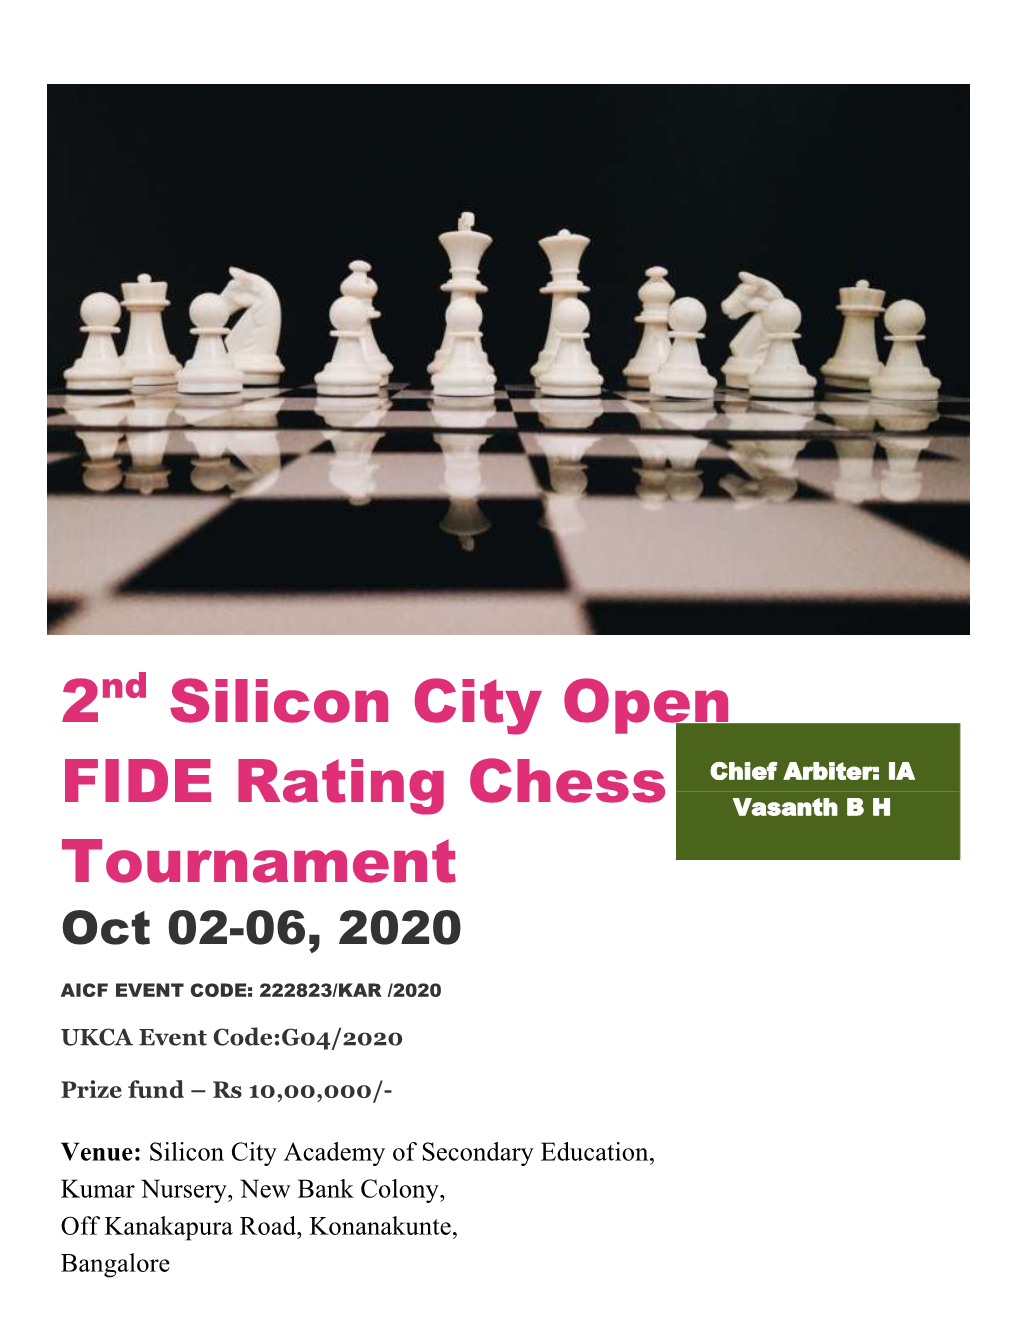 2Nd Silicon City Open FIDE Rating Chess Tournament